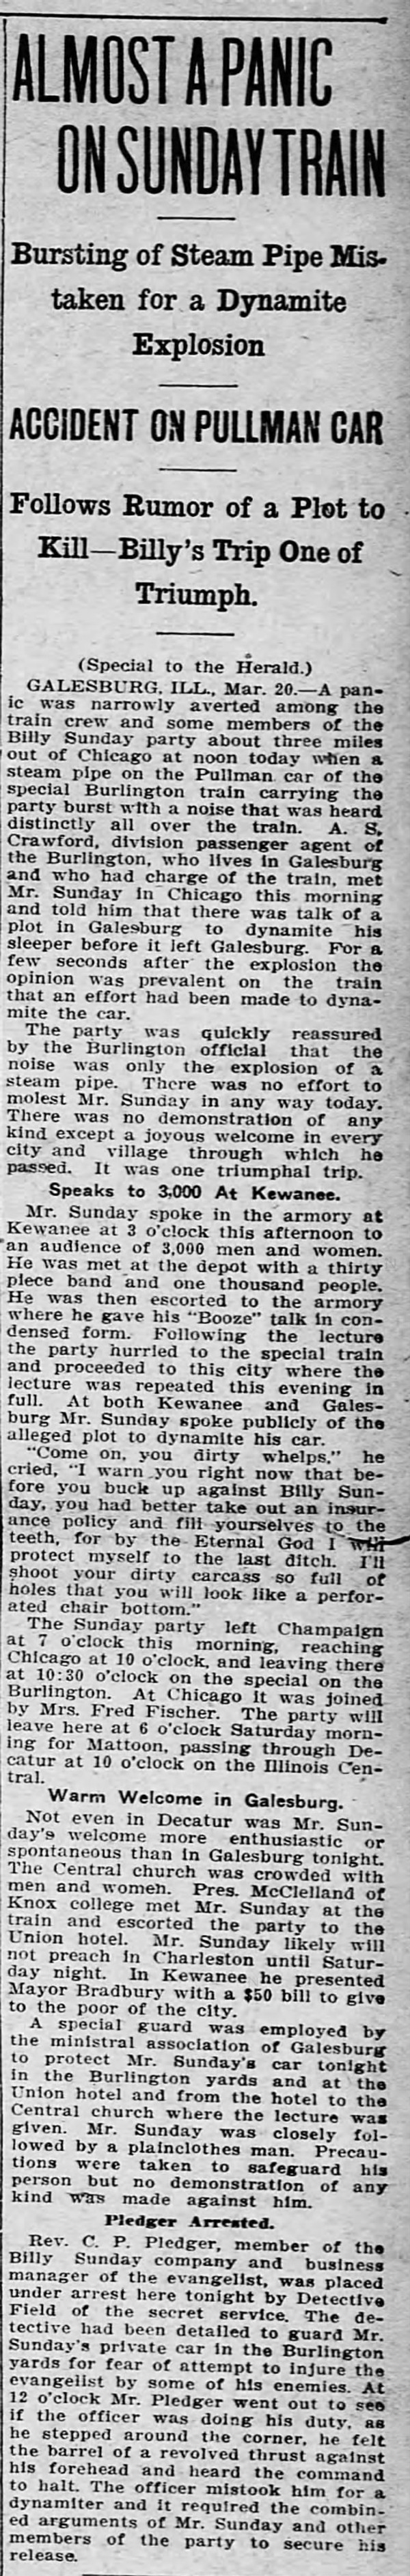 Newspaper article titled Almost A Panic on Sunday Train